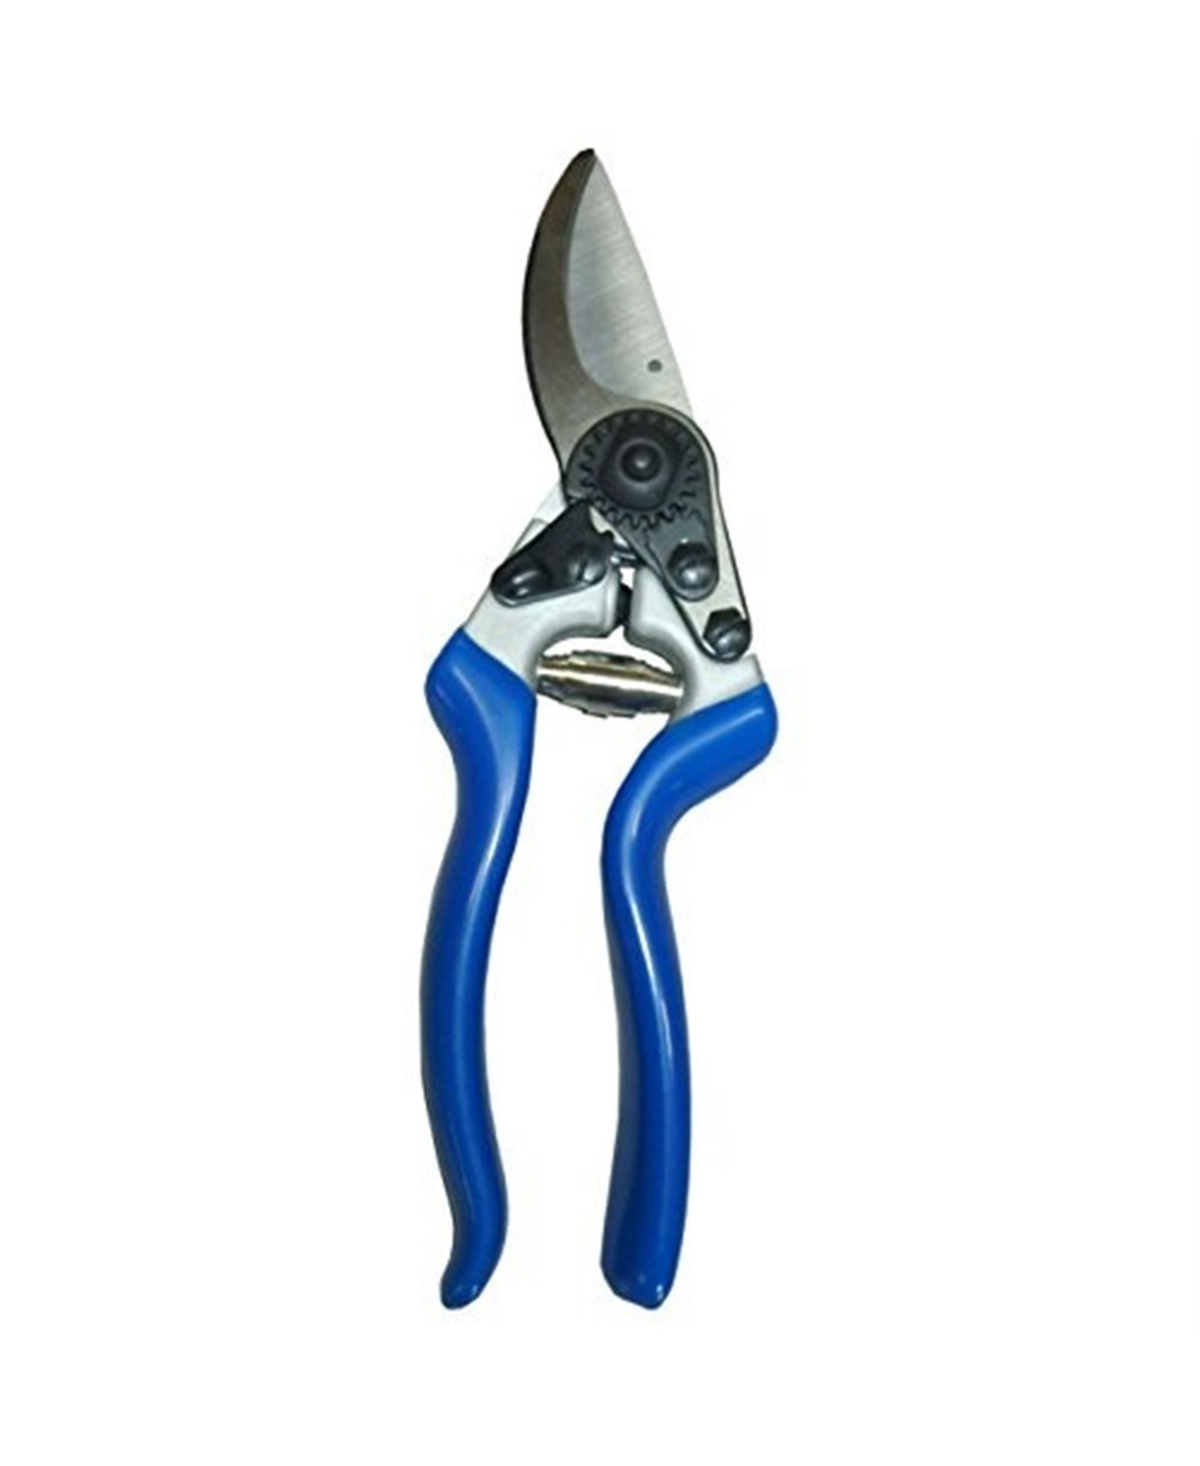 Gardener Select Premium Drop Forged Aluminum Bypass Pruner 8.5 Inches - Multi